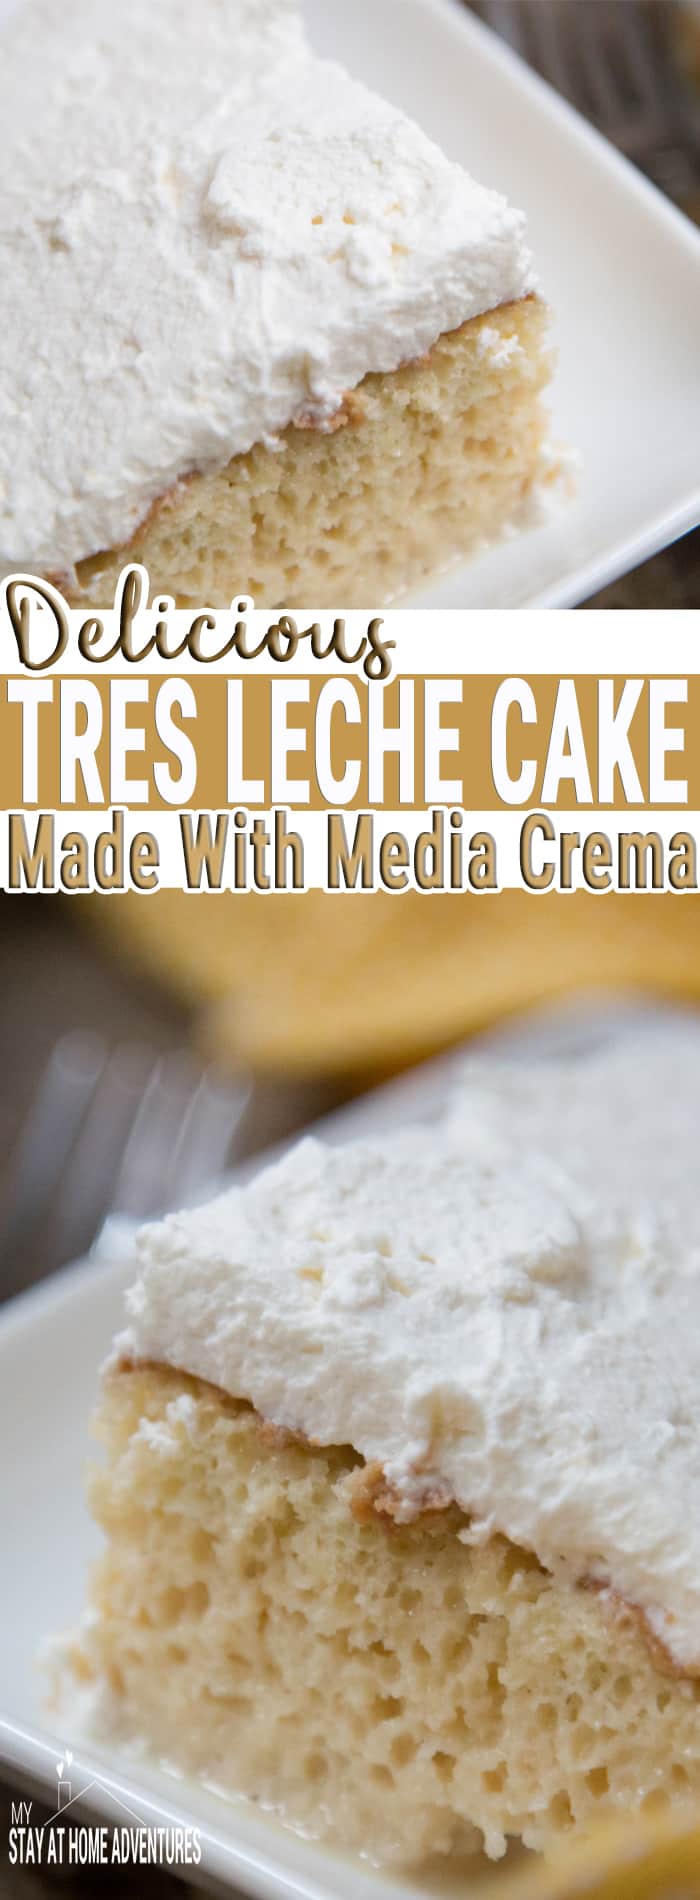 Try this Tres Leche Cake recipe using Media Crema, and you are going to never want to try another Tres Leche Cake recipe again! via @mystayathome